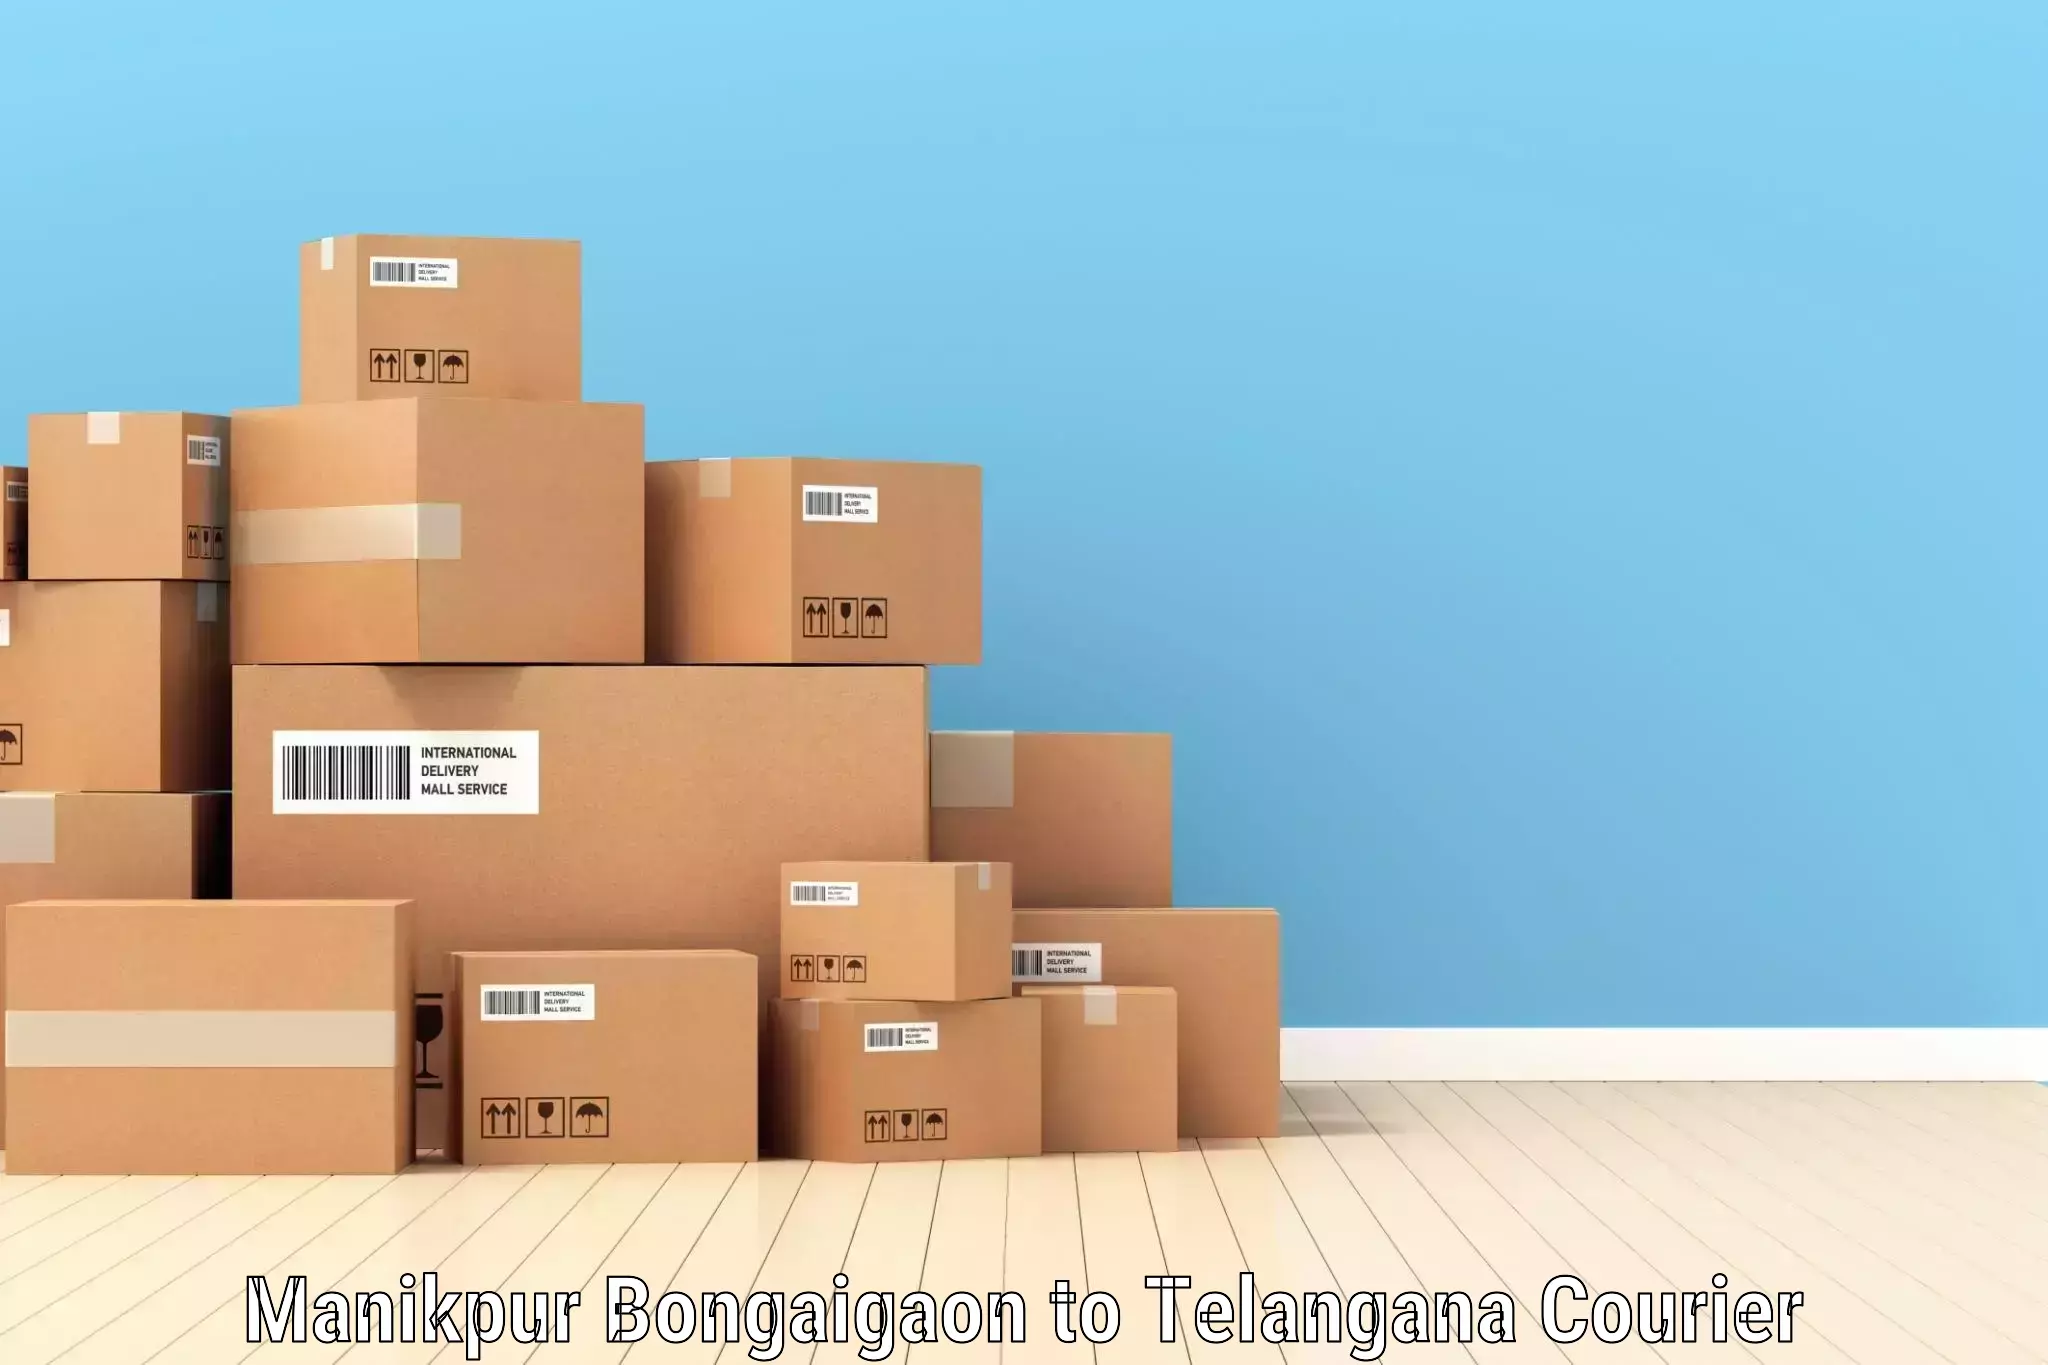 Next-day delivery options in Manikpur Bongaigaon to Trimulgherry